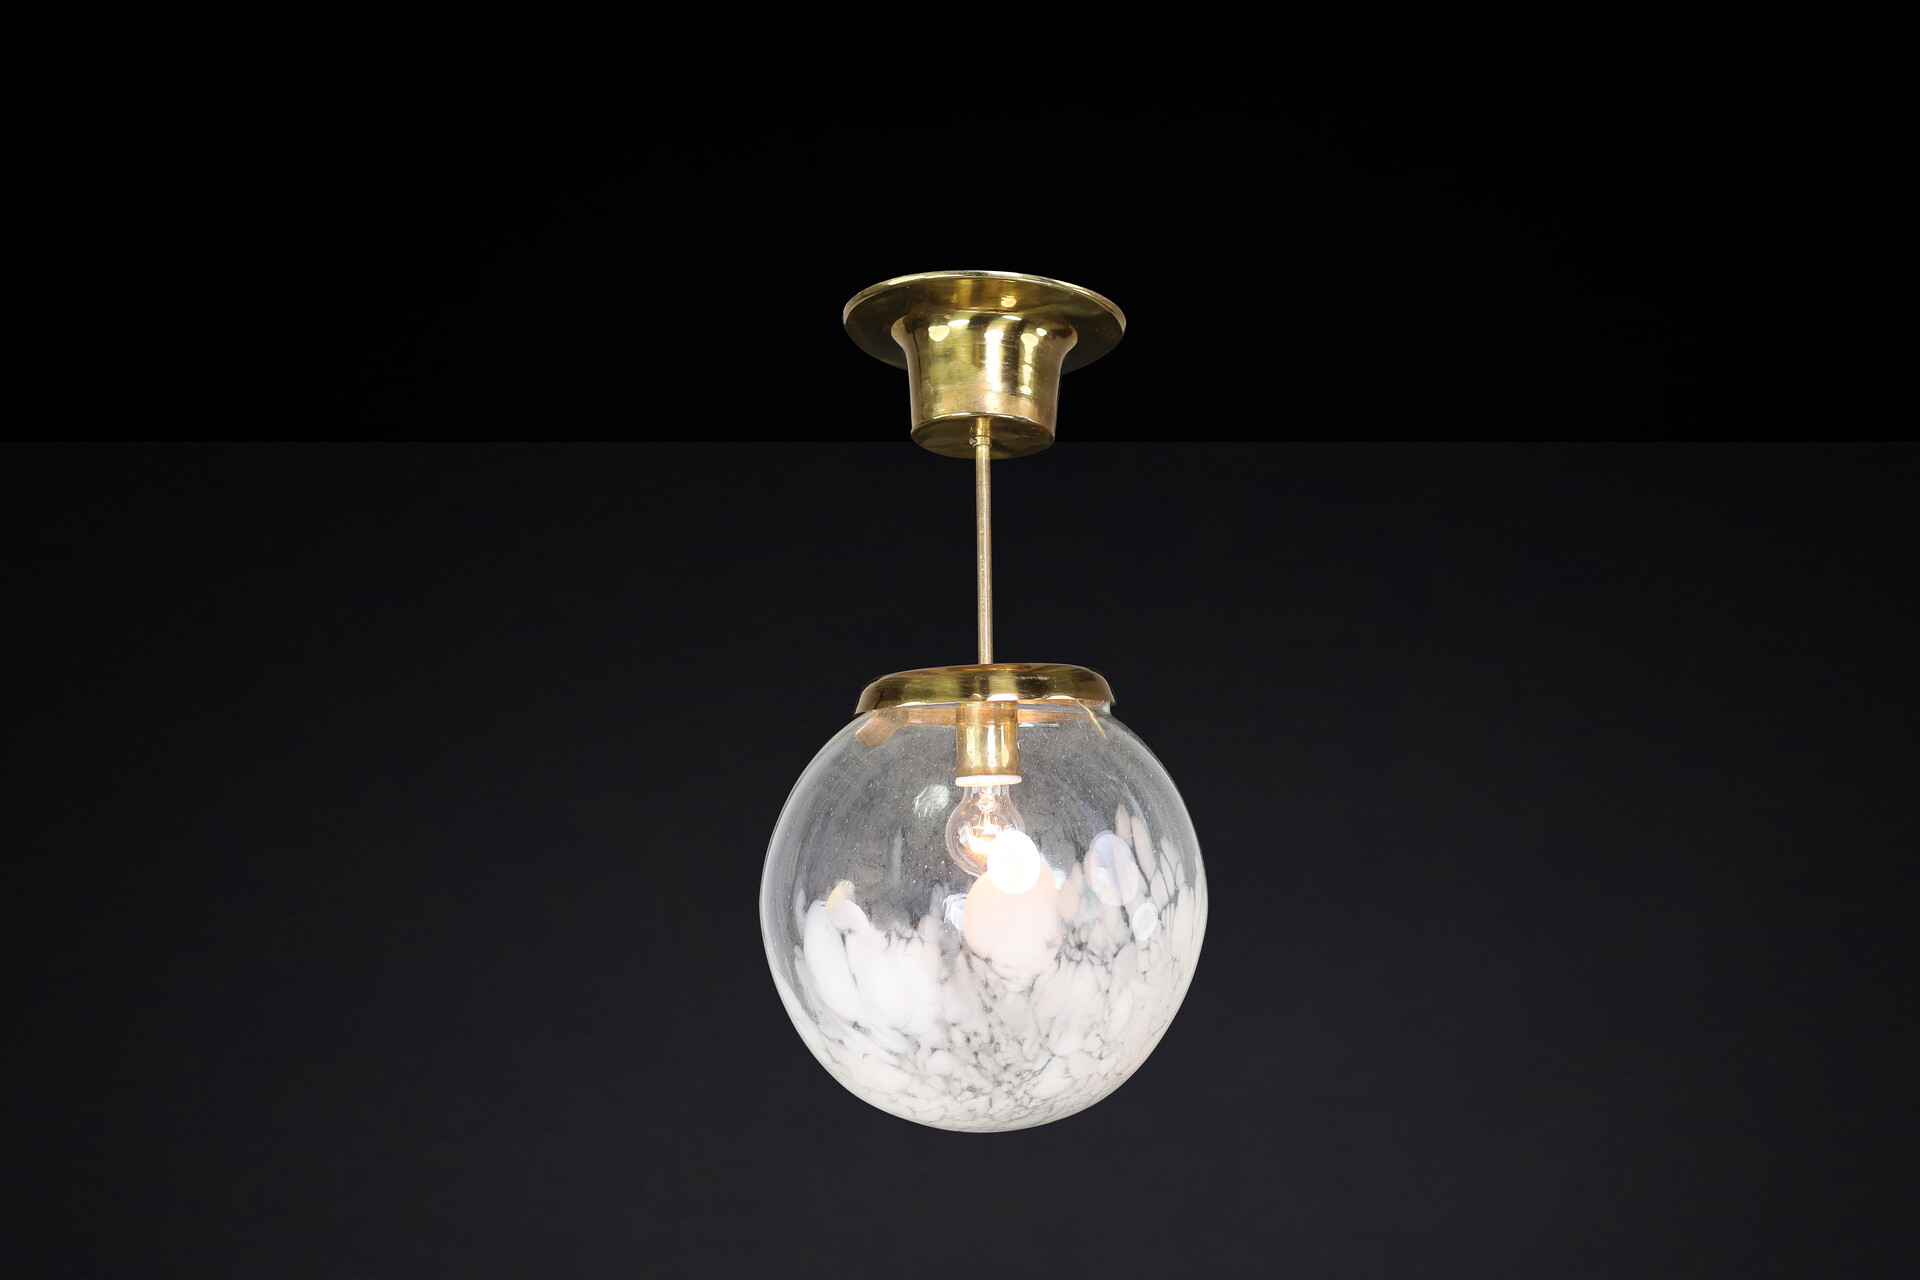 Mid century modern Pendant in Brass and Art-Glass with White Streaks,CZ 1960s Mid-20th century